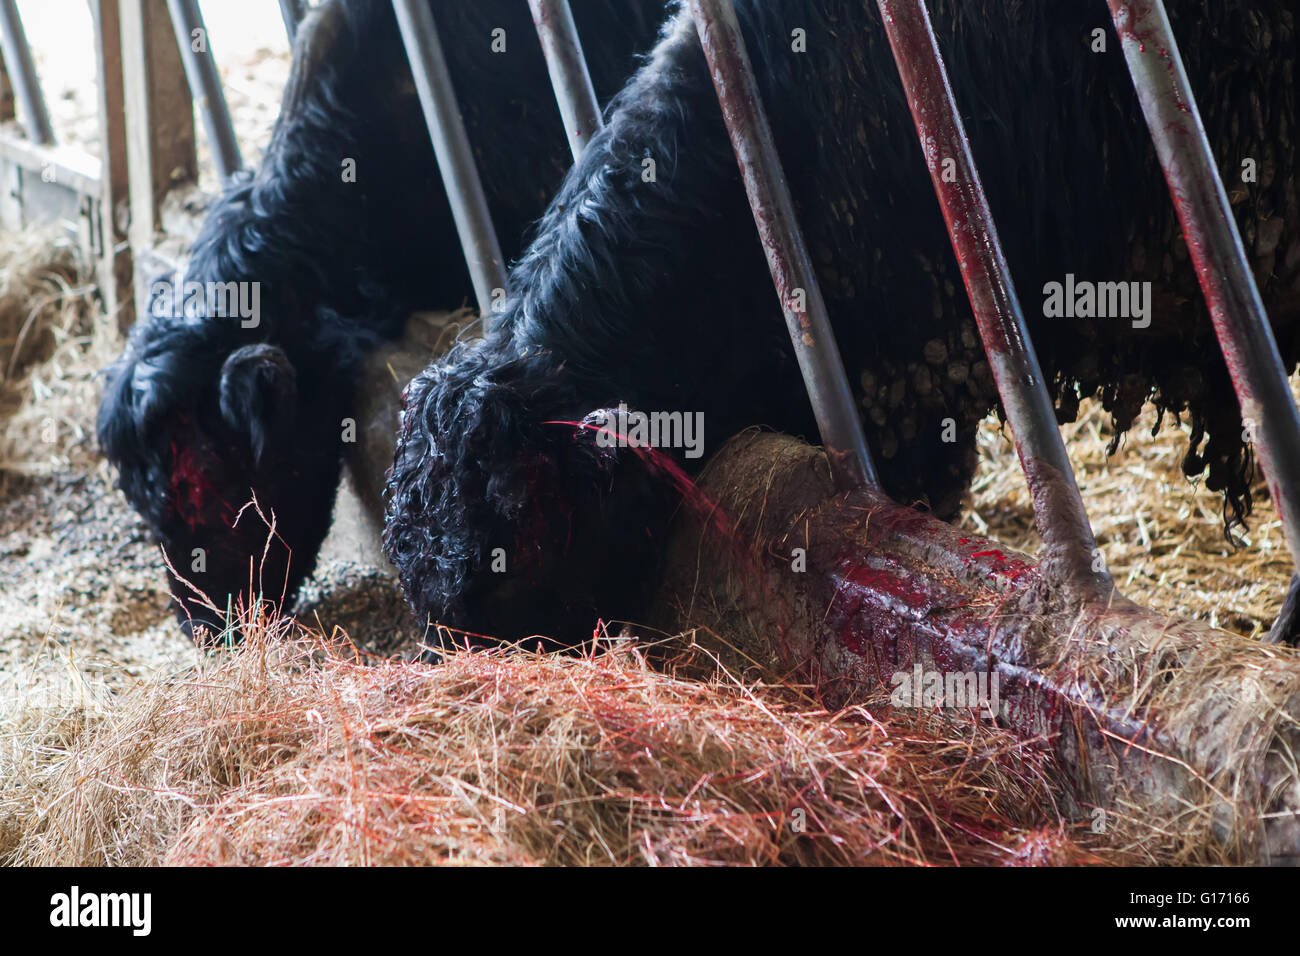 A Welsh black bull that has just been de-horned and the blood is squirting out of its arteries Stock Photo